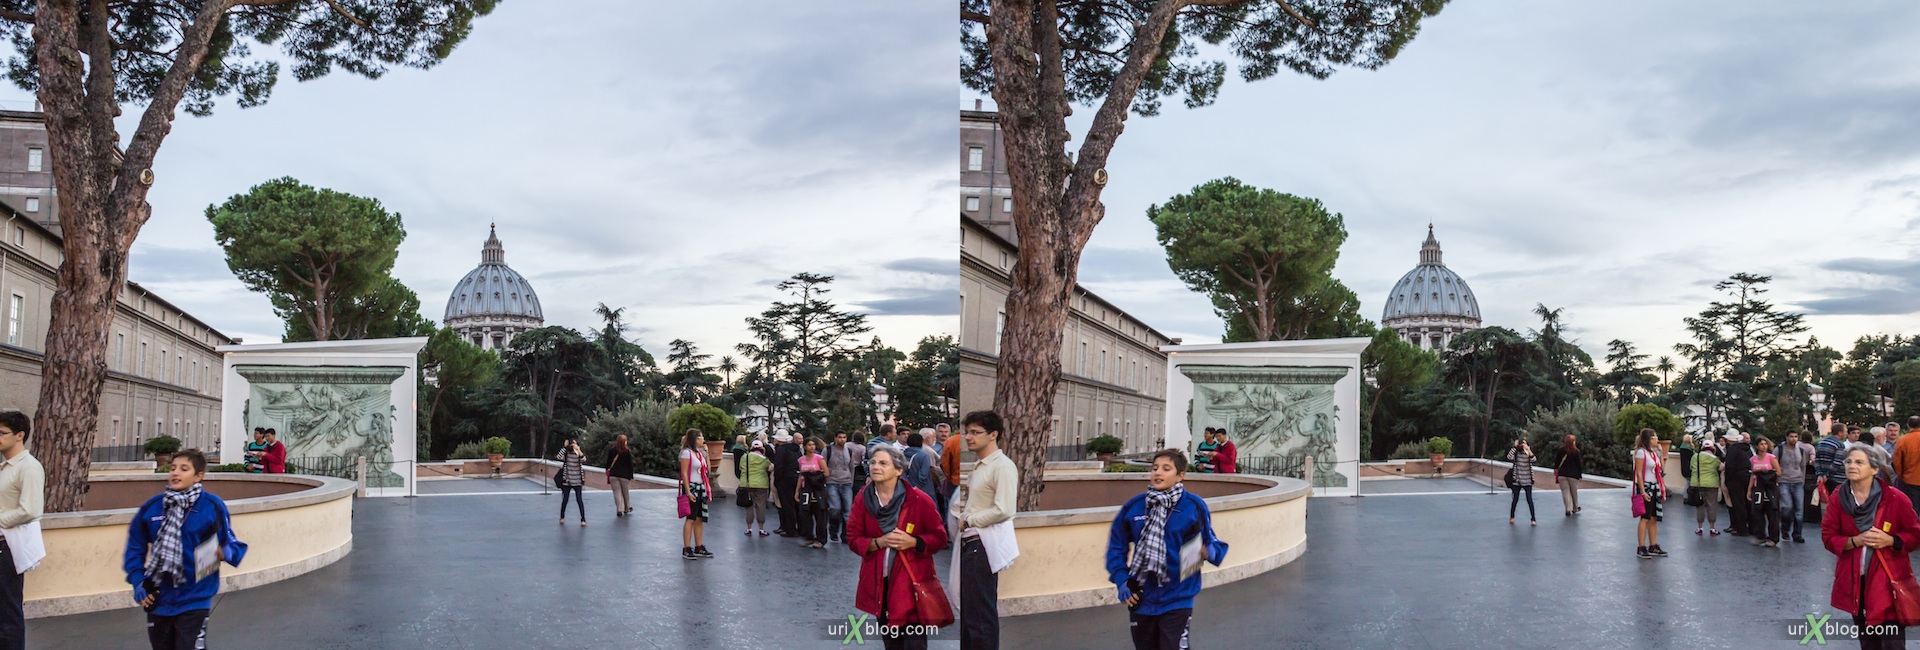 2012, Vatican museums, Rome, Italy, 3D, stereo pair, cross-eyed, crossview, cross view stereo pair